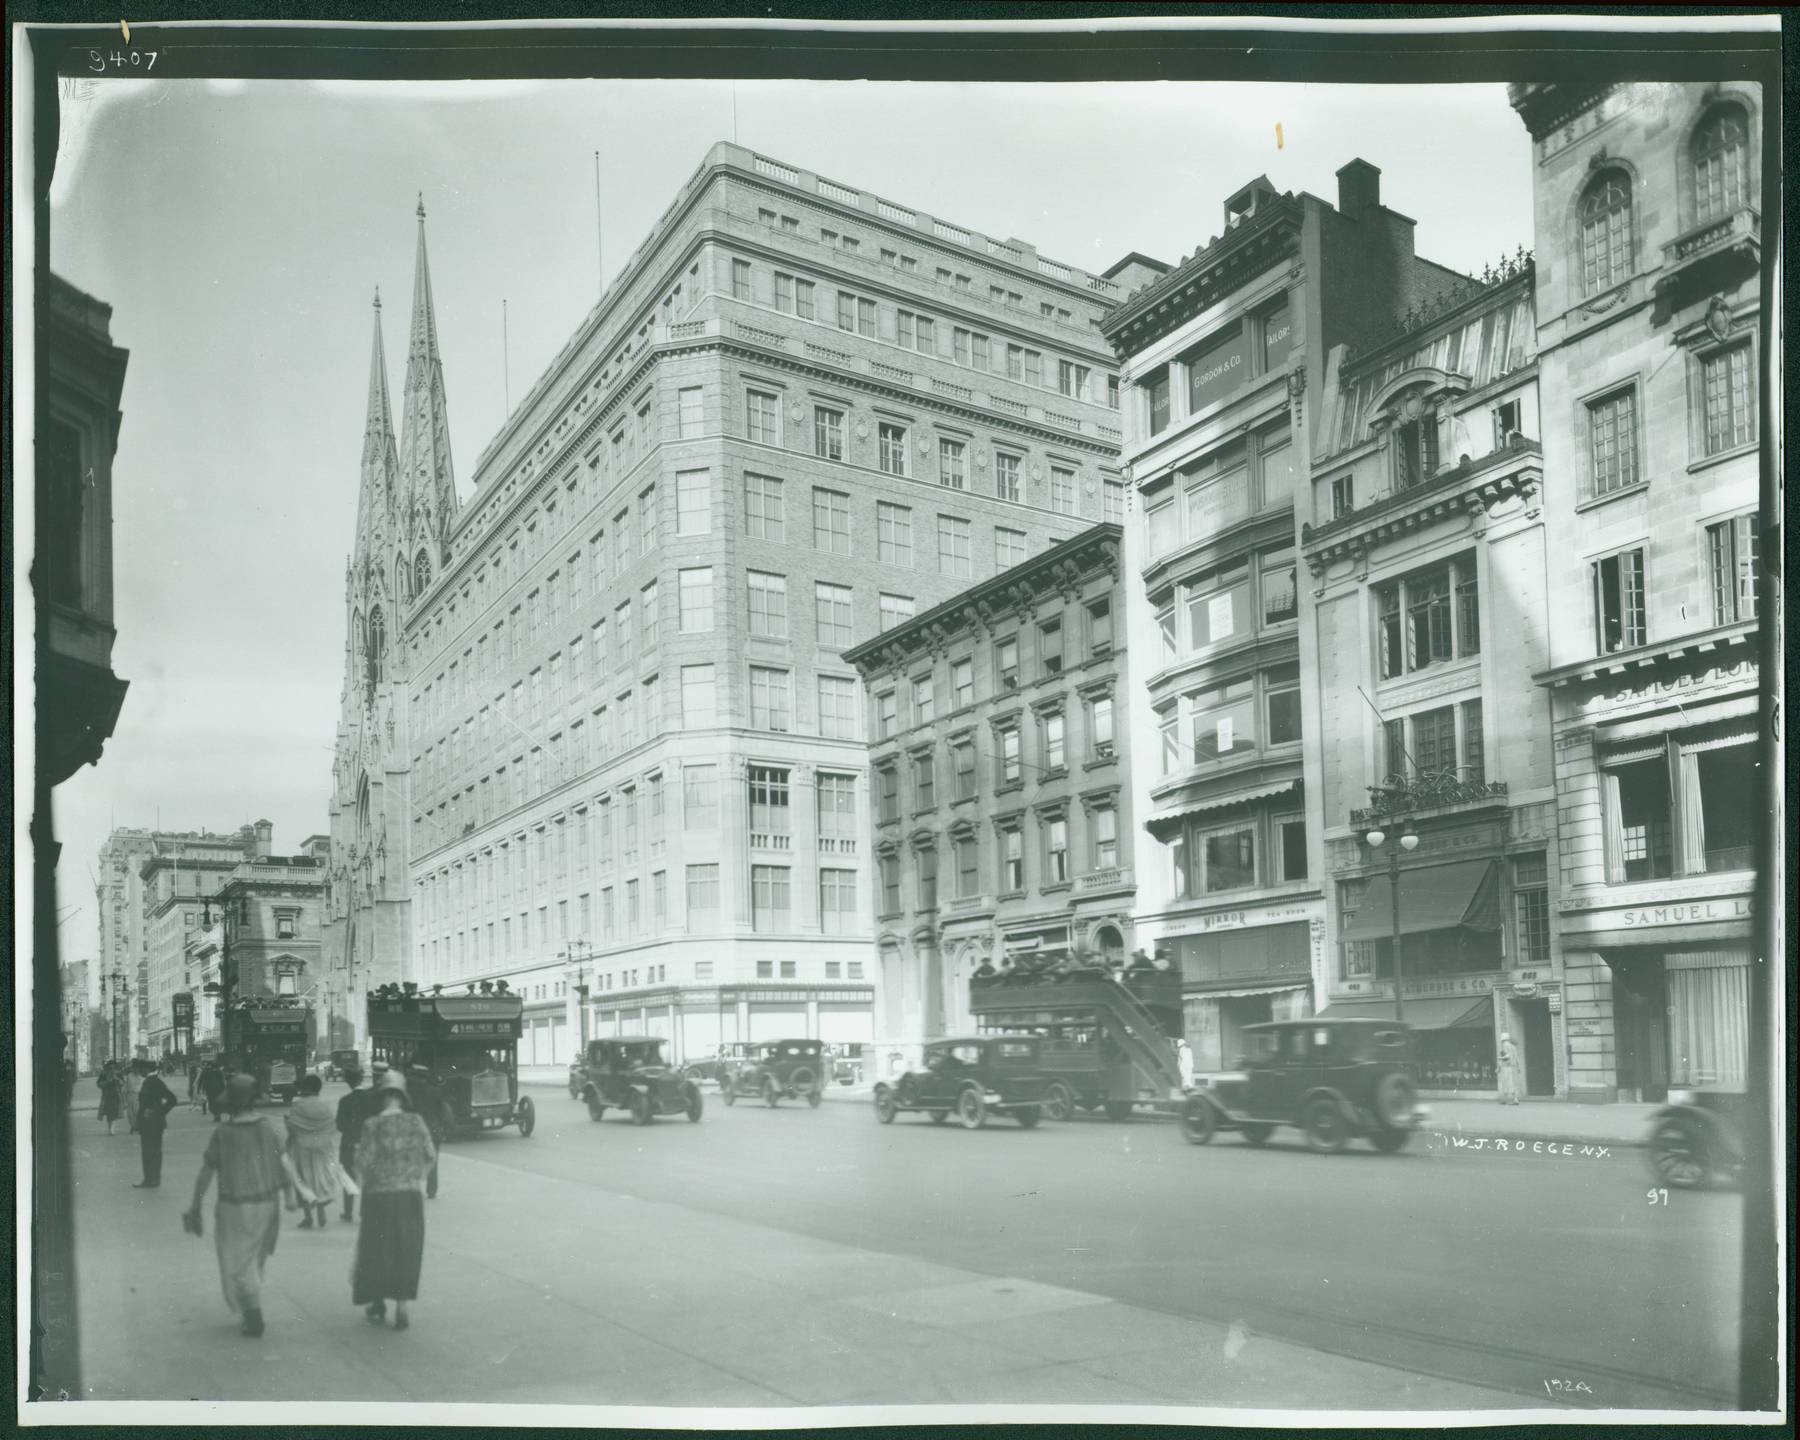 B&w photo of Saks fifth ave and St. Patrick's Cathedral with people and cars on the street